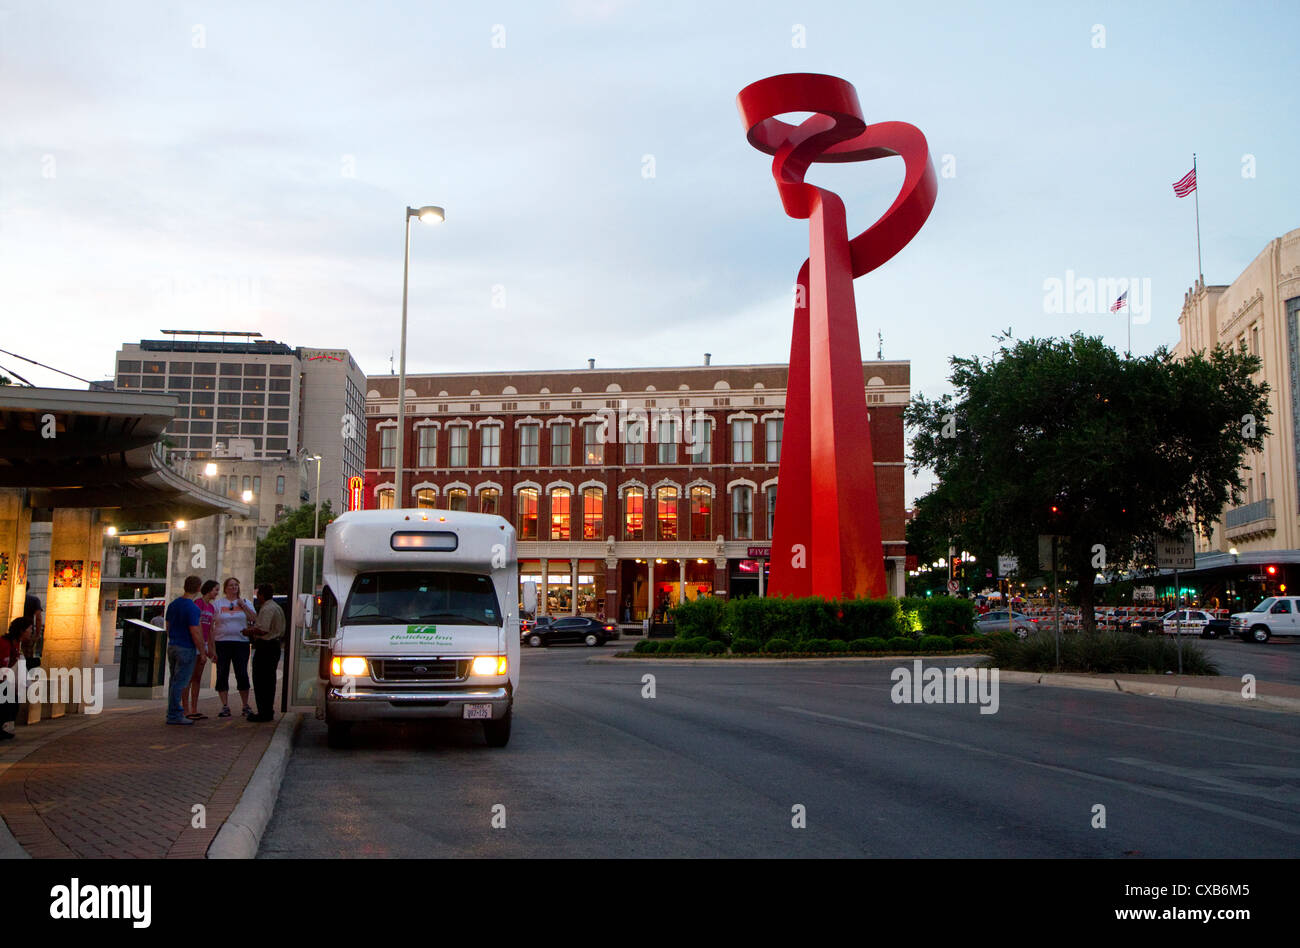 Torch of Friendship public art sculpture at the intersection of Losoya, Commerce and Alamo streets in San Antonio, Texas, USA. Stock Photo